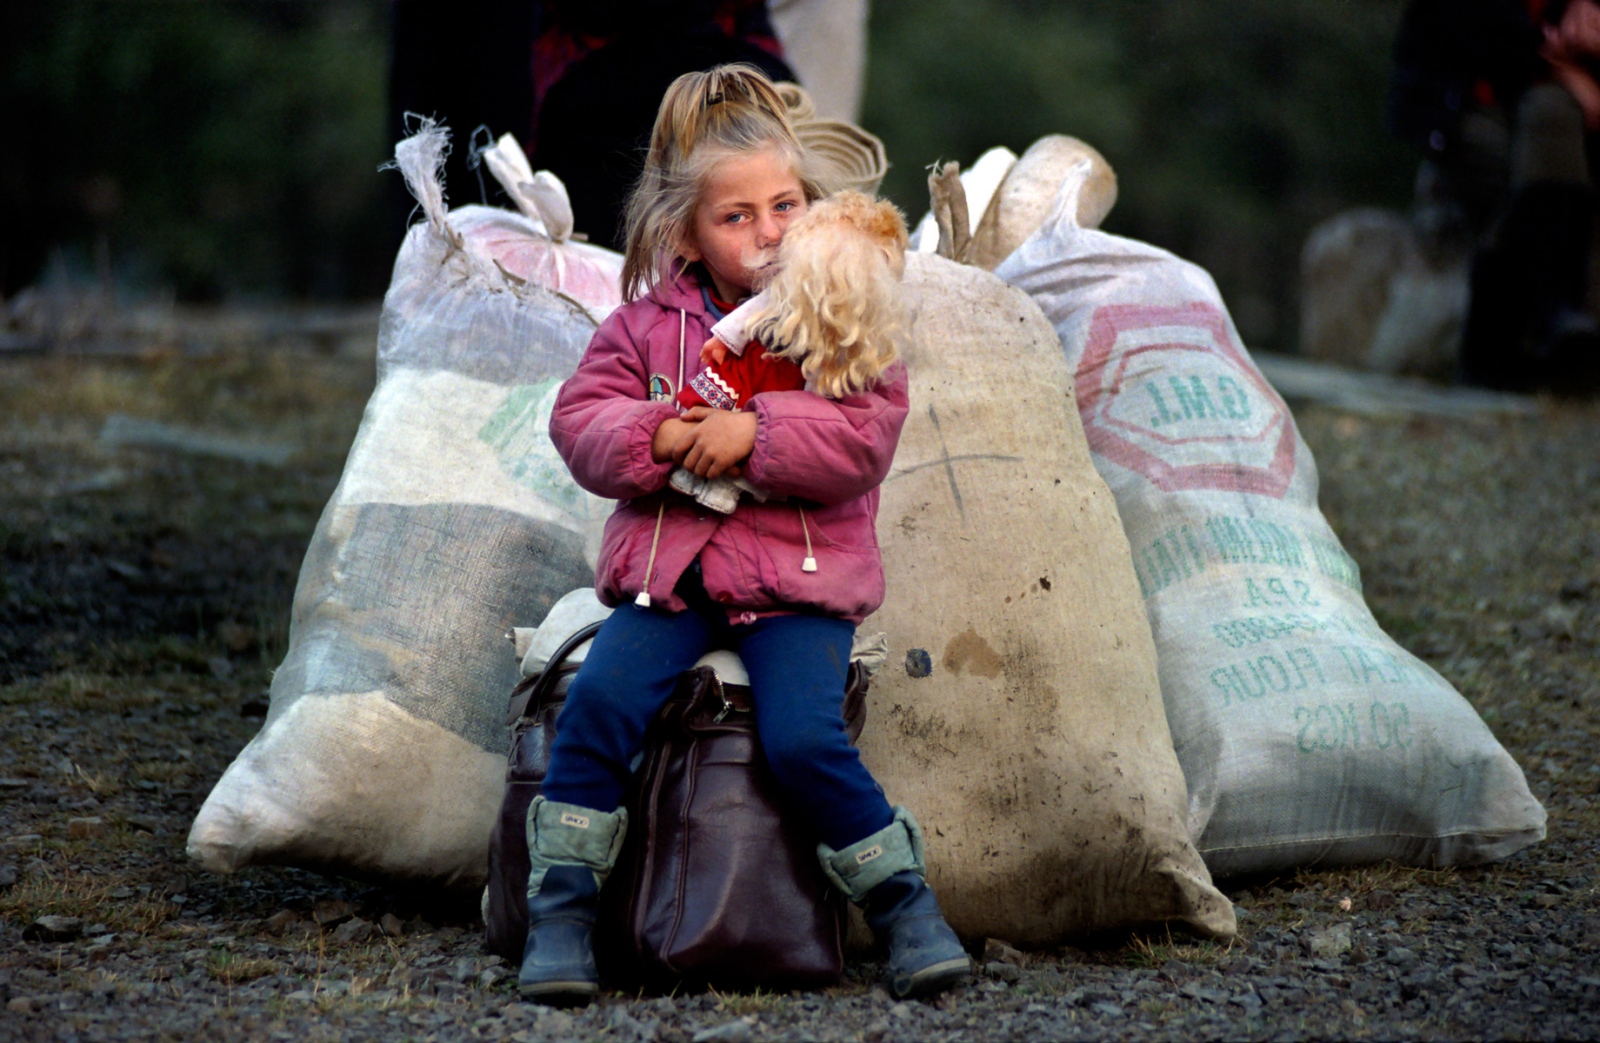 Forgotten Wars - A girl guards her family's belongings, as her parents...